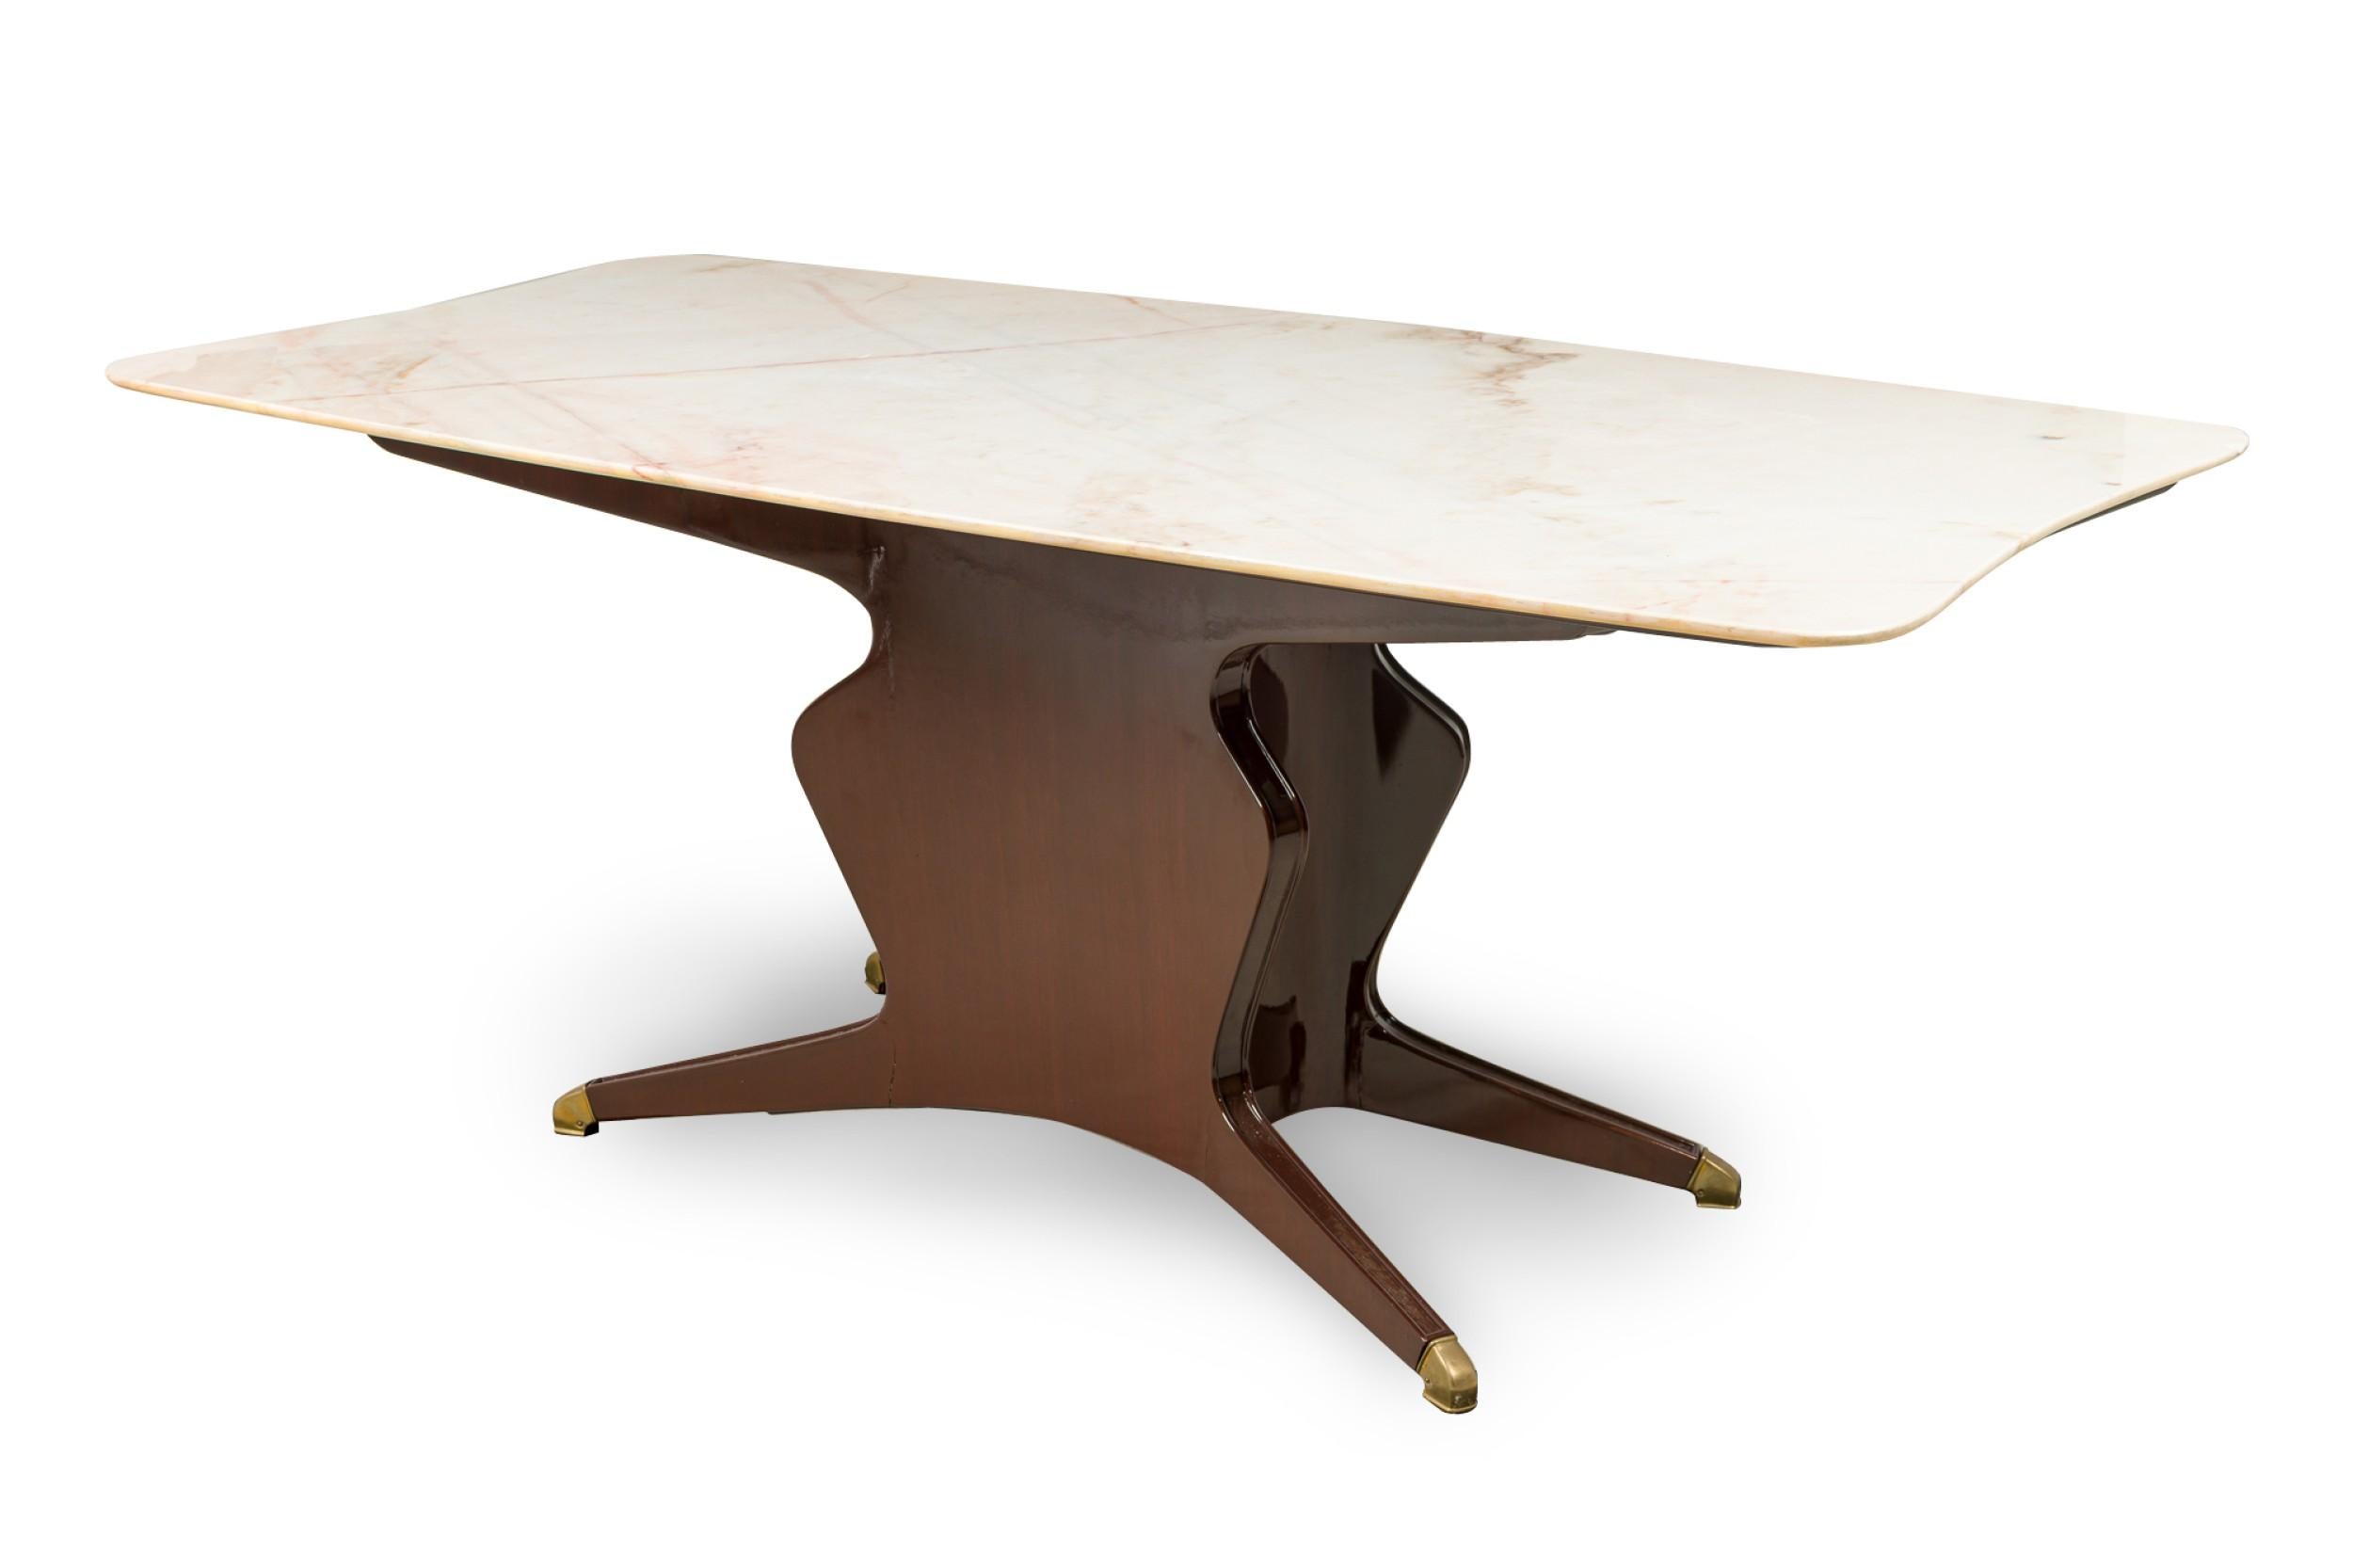 Italian Mid-Century Modern dining / conference table with a shaped rectangular white onyx table top supported by a lacquered mahogany pedestal base with four angled legs ending in brass sabots. (chip to corner of marble top)
 

 Chips in on one